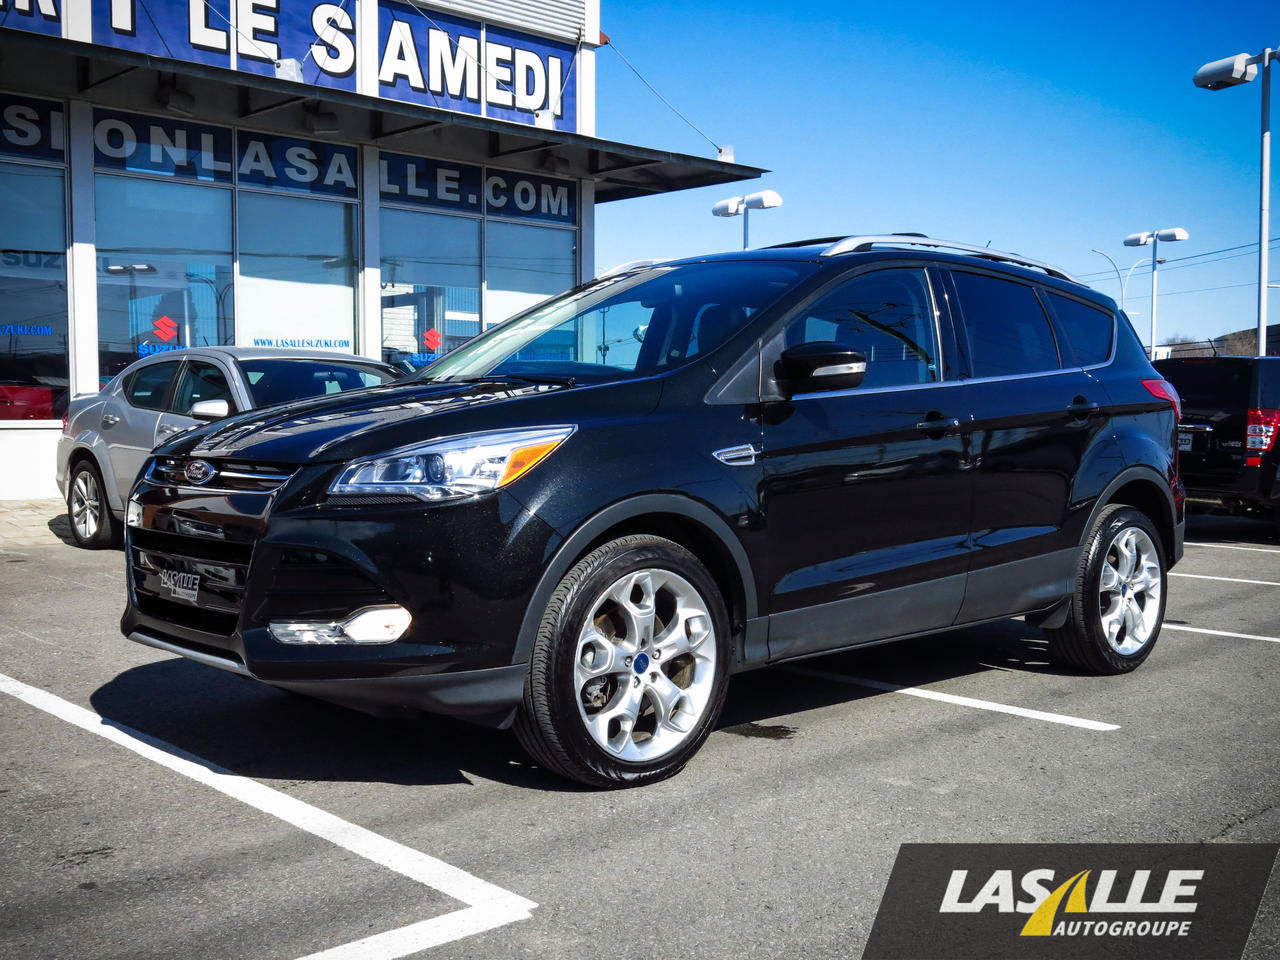 Buy used ford escape montreal #5